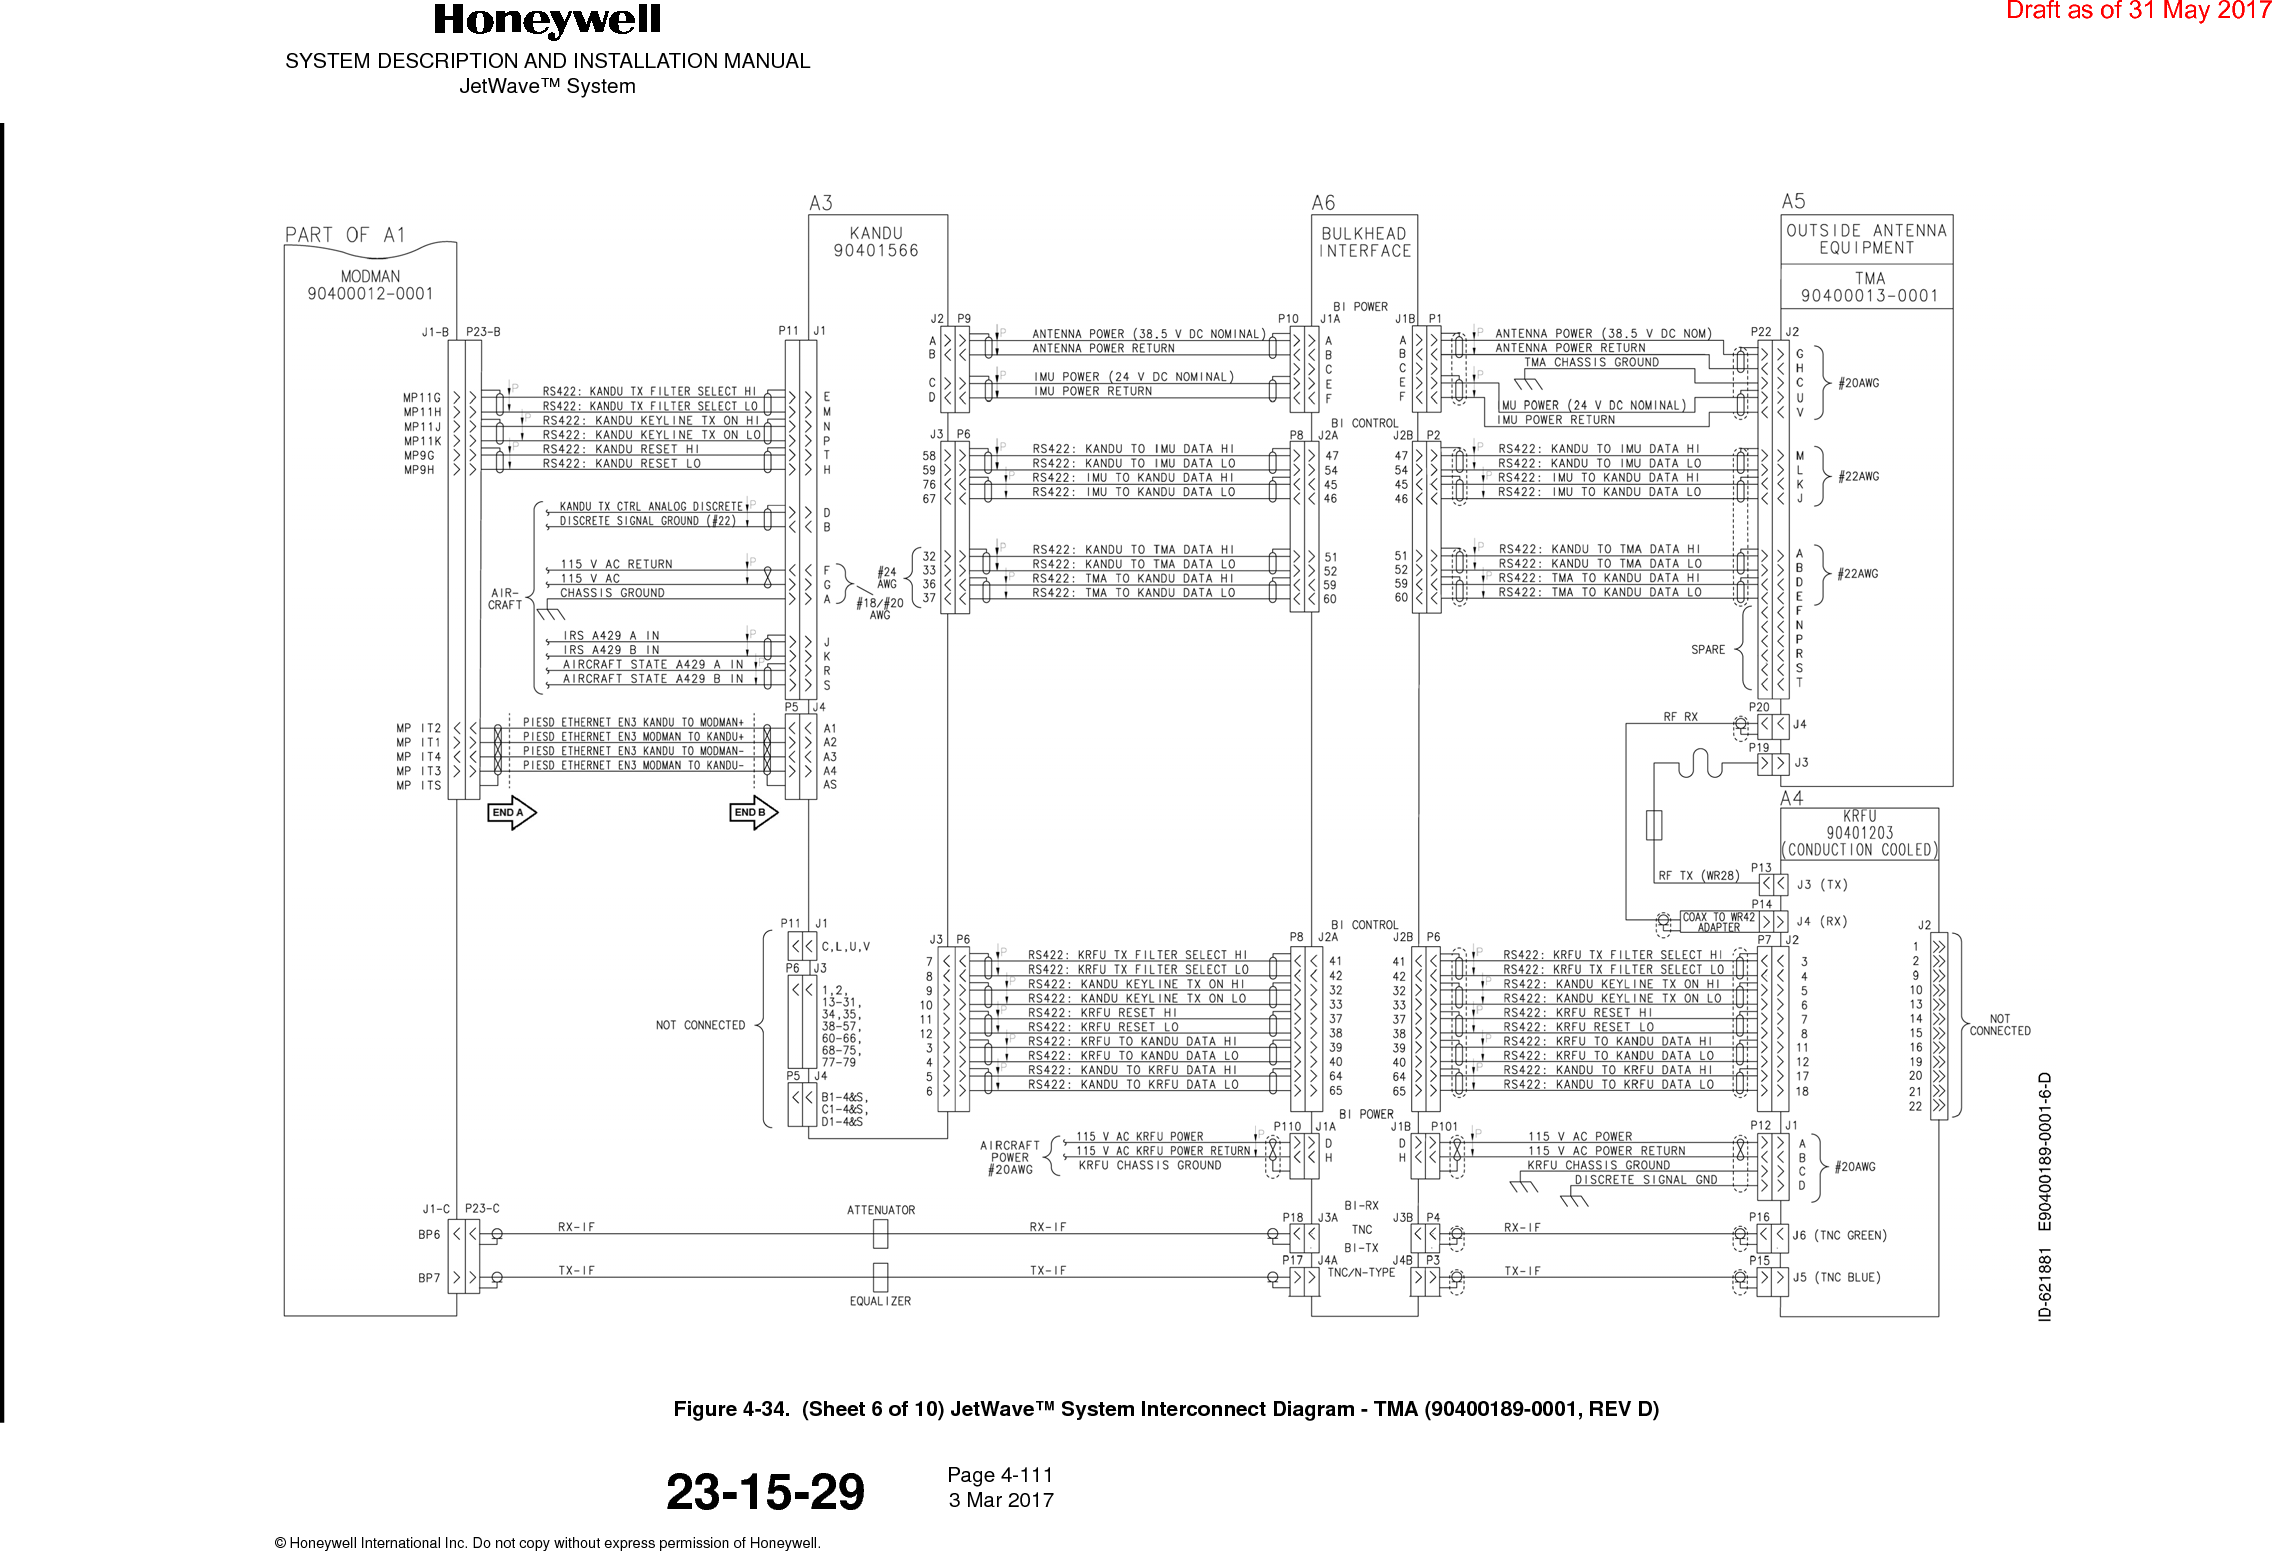 SYSTEM DESCRIPTION AND INSTALLATION MANUALJetWave™ SystemPage 4-111 3 Mar 2017© Honeywell International Inc. Do not copy without express permission of Honeywell.23-15-29Figure 4-34.  (Sheet 6 of 10) JetWave™ System Interconnect Diagram - TMA (90400189-0001, REV D)Draft as of 31 May 2017